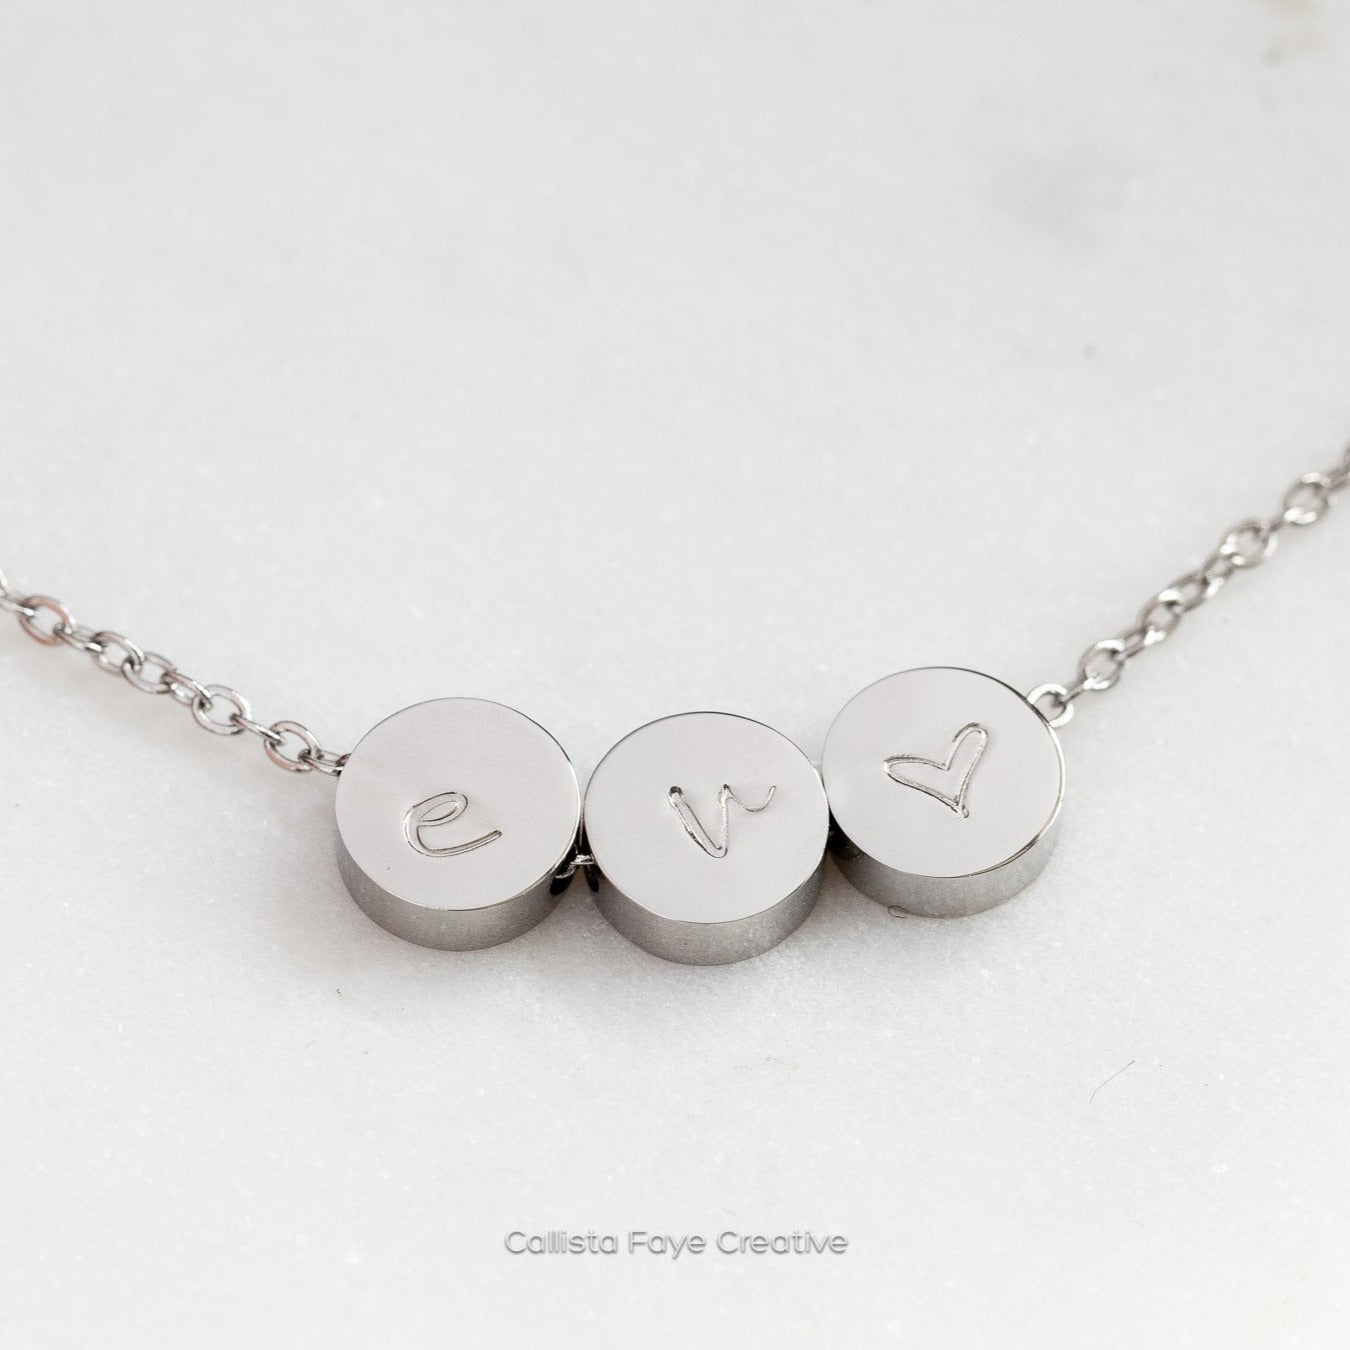 Custom Initial, Birth Flower Mini Coin Bead Necklace, Personalized Necklaces callistafaye 3 Beads Silver 